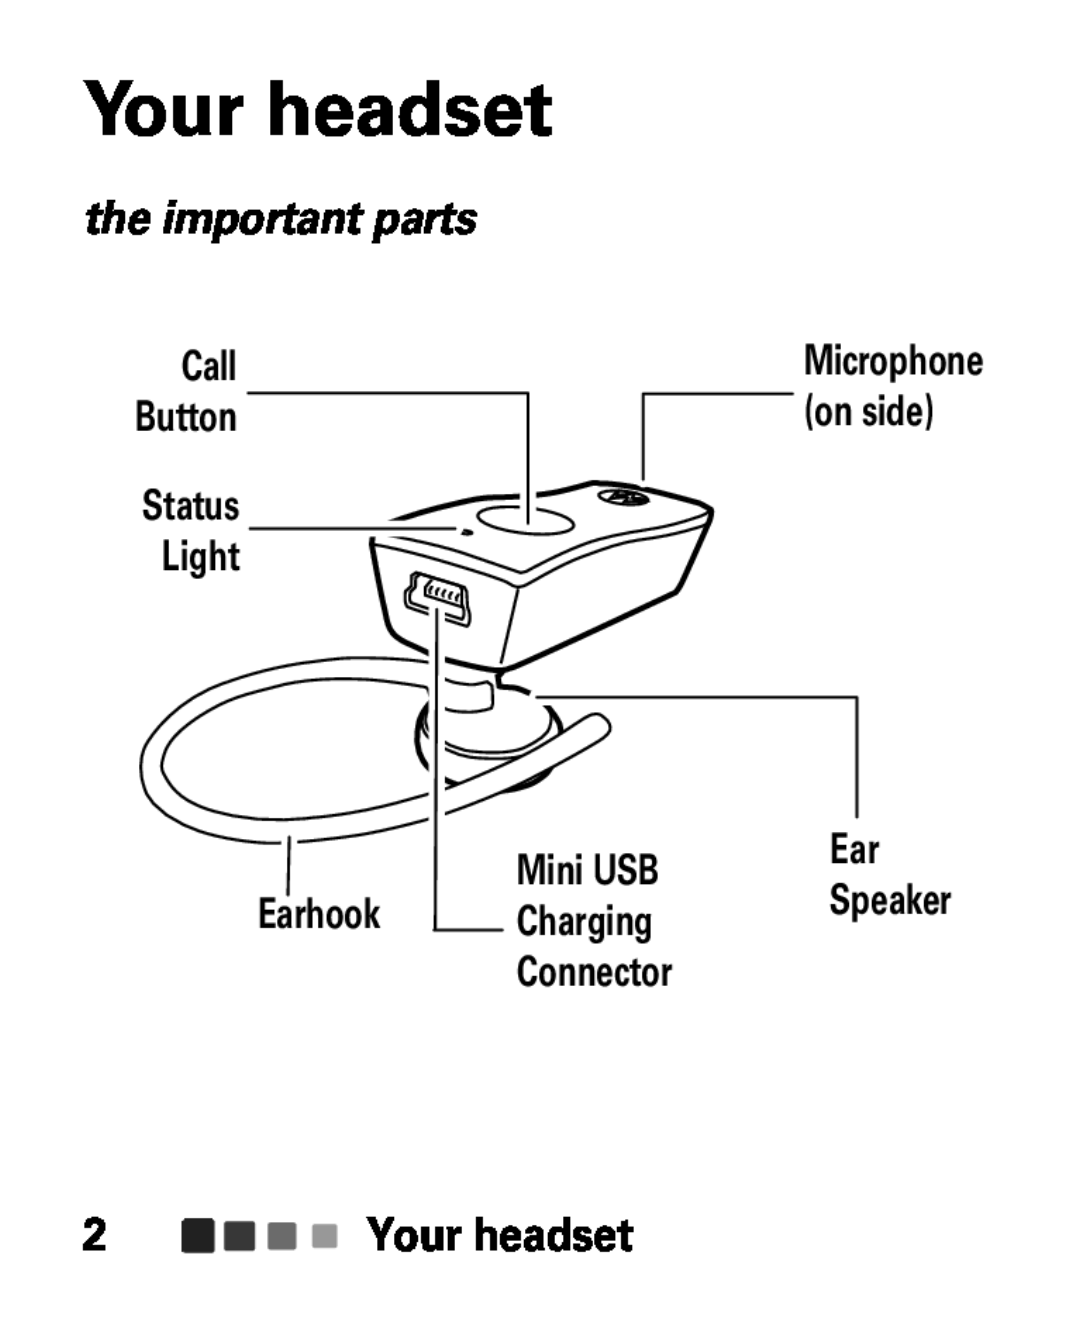 Motorola HK100 Your headset, the important parts, Call Button Status Light, Earhook, Mini USB, Charging, Connector 